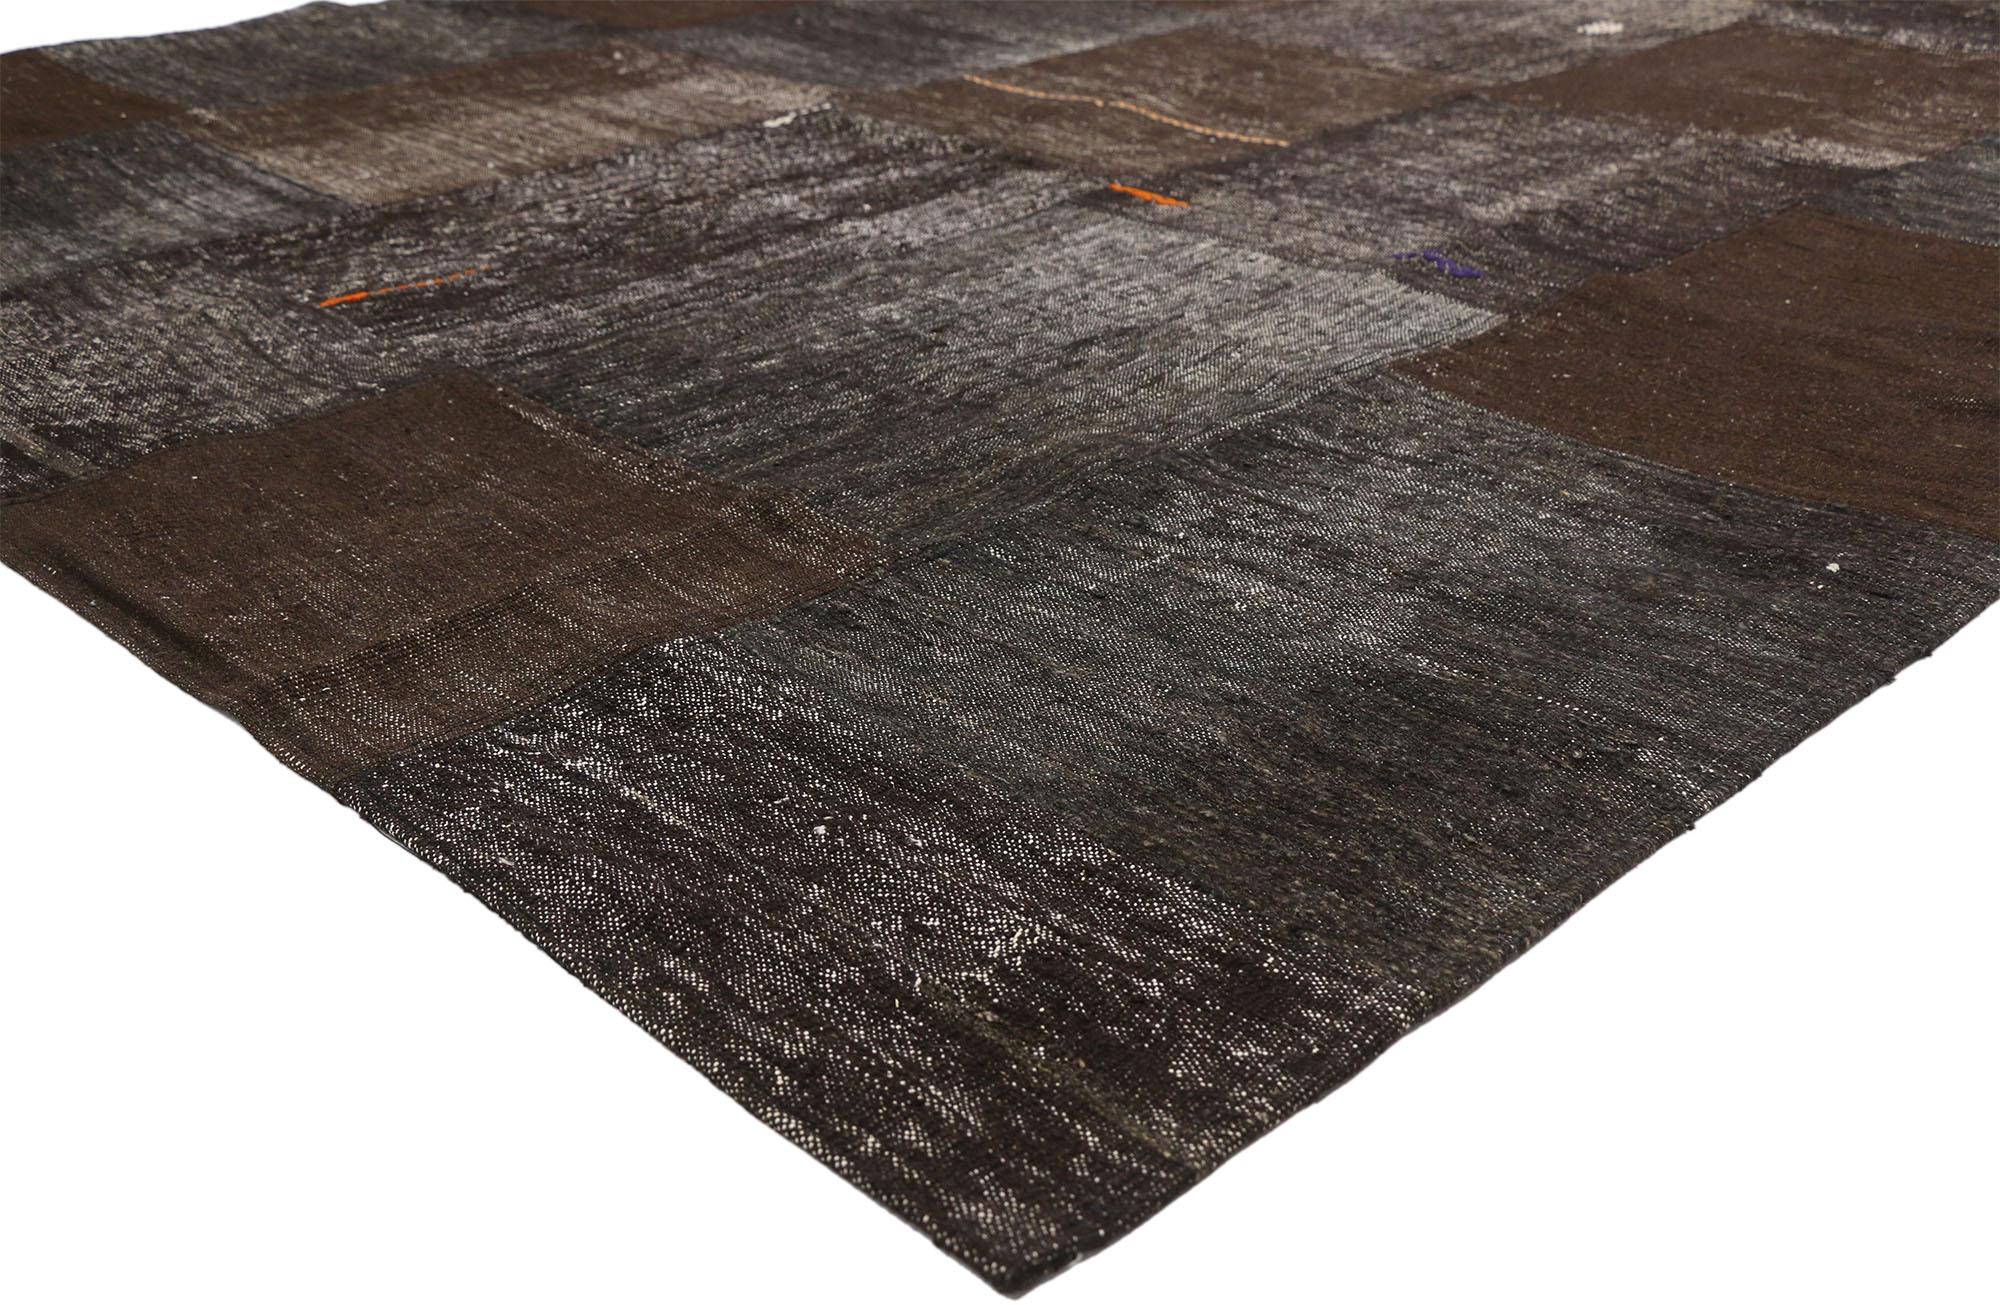 51064 Vintage Turkish Patchwork Kilim Rug, 08'04 X 10'01. 
Emanating masculine appeal and Wabi-Sabi style, this vintage Turkish patchwork rug is a captivating vision of woven beauty. The geometric design and earthy colorway woven into this piece